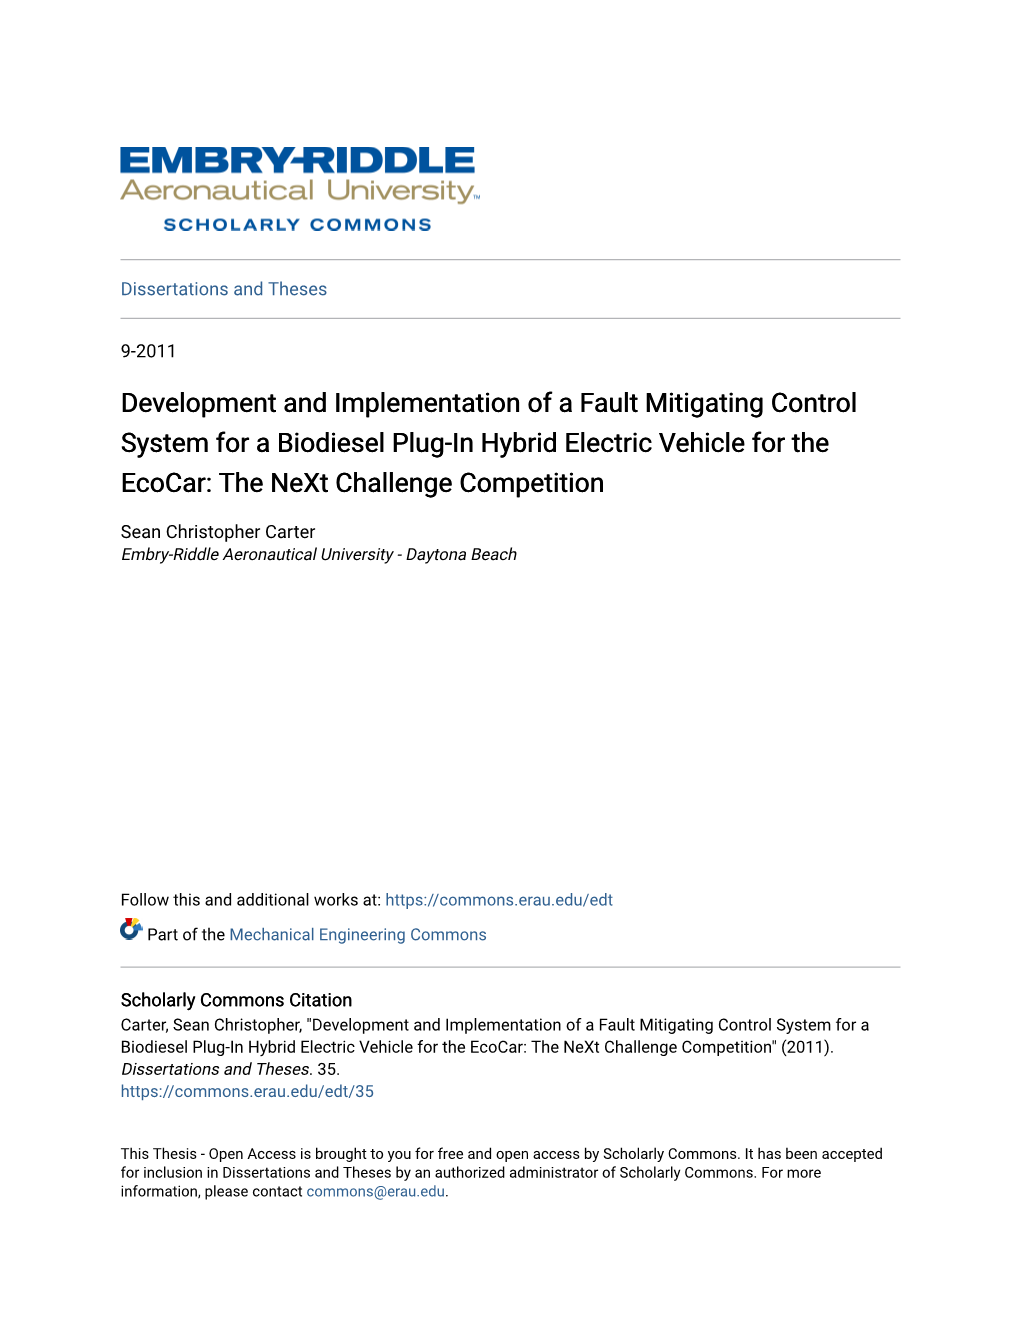 Development and Implementation of a Fault Mitigating Control System for a Biodiesel Plug-In Hybrid Electric Vehicle for the Ecocar: the Next Challenge Competition